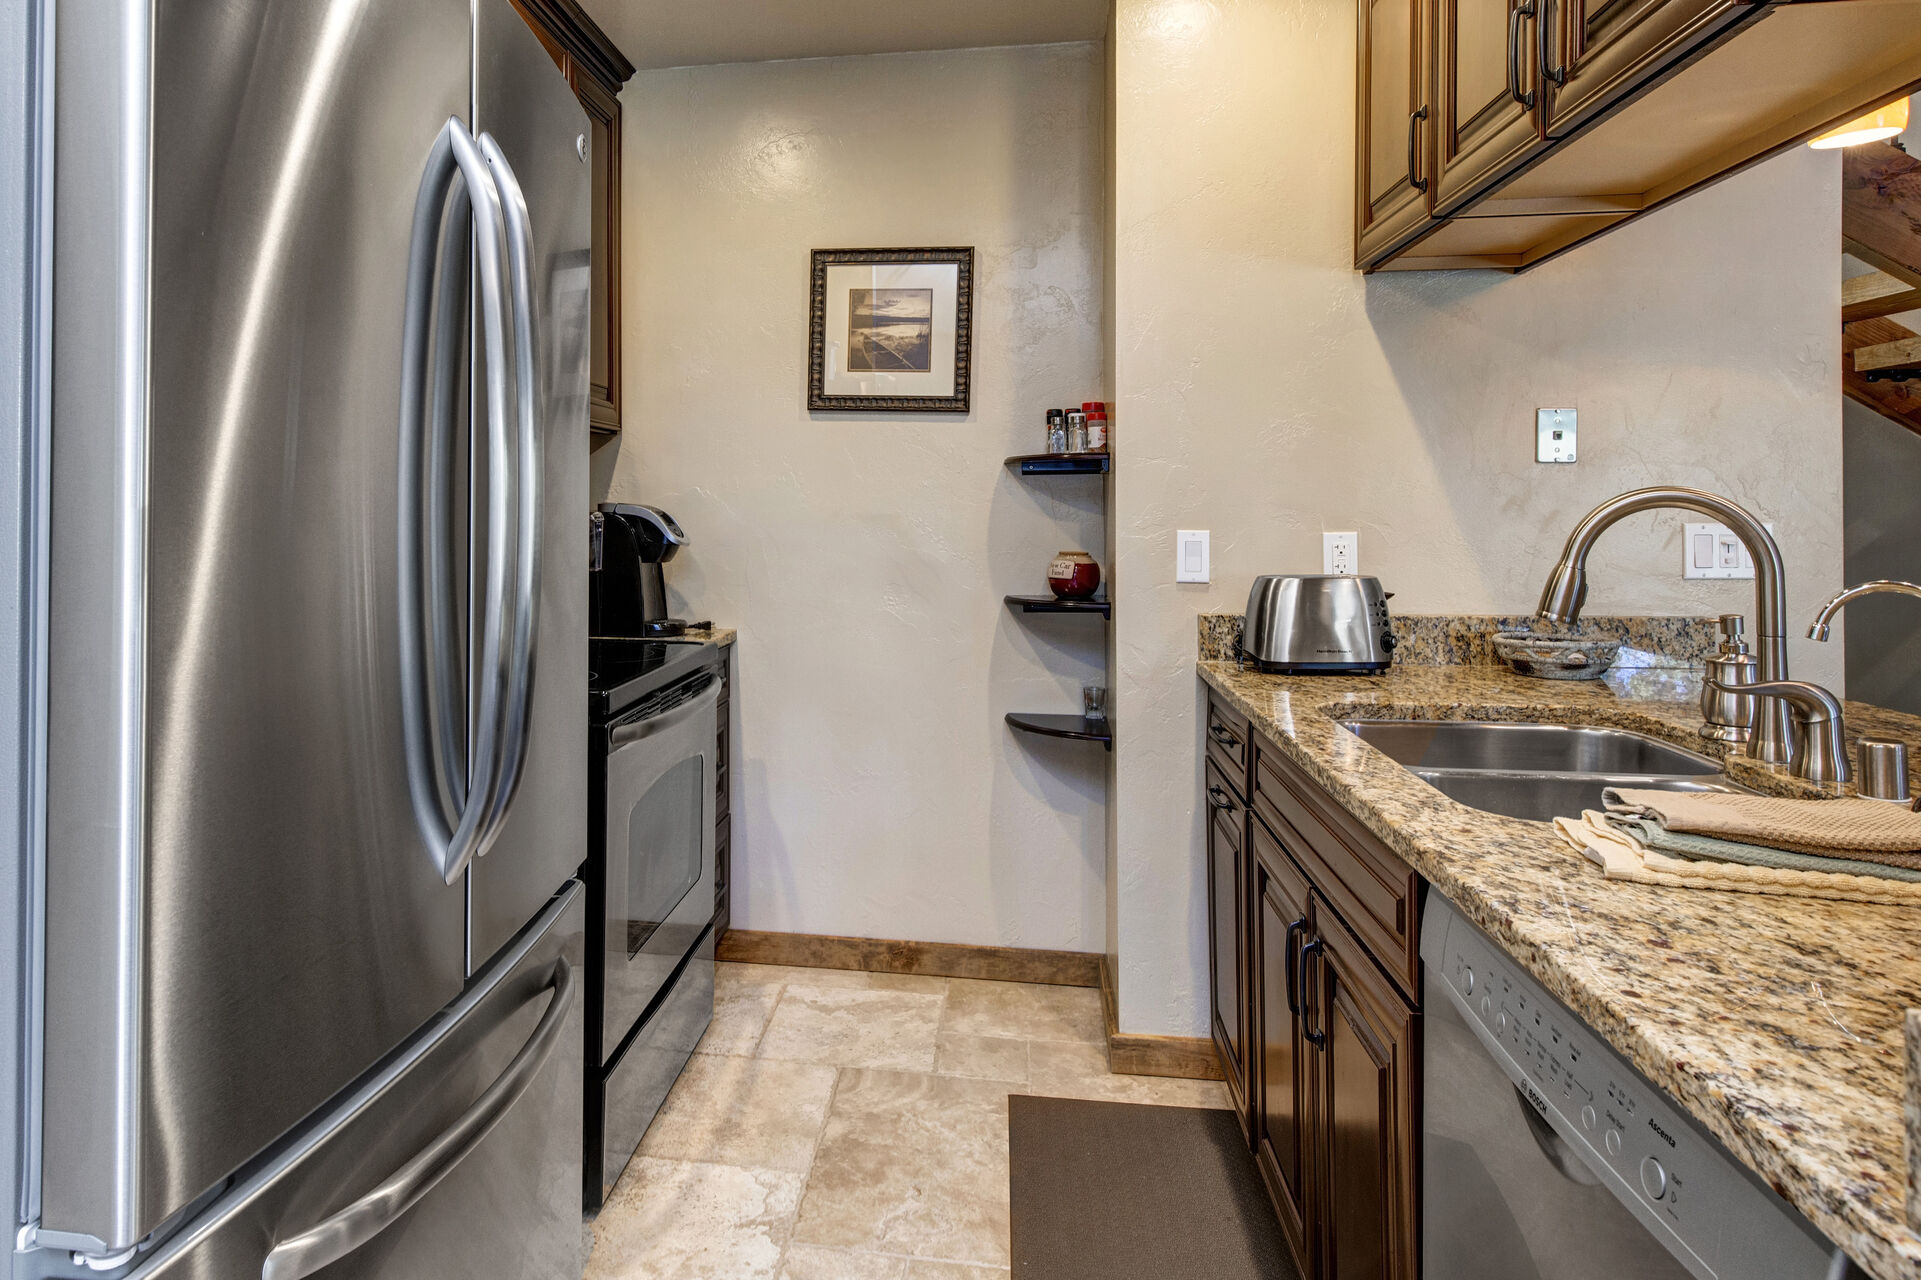 Fully Equipped kitchen with stainless steel appliances, stone countertops and bar seating for up to three